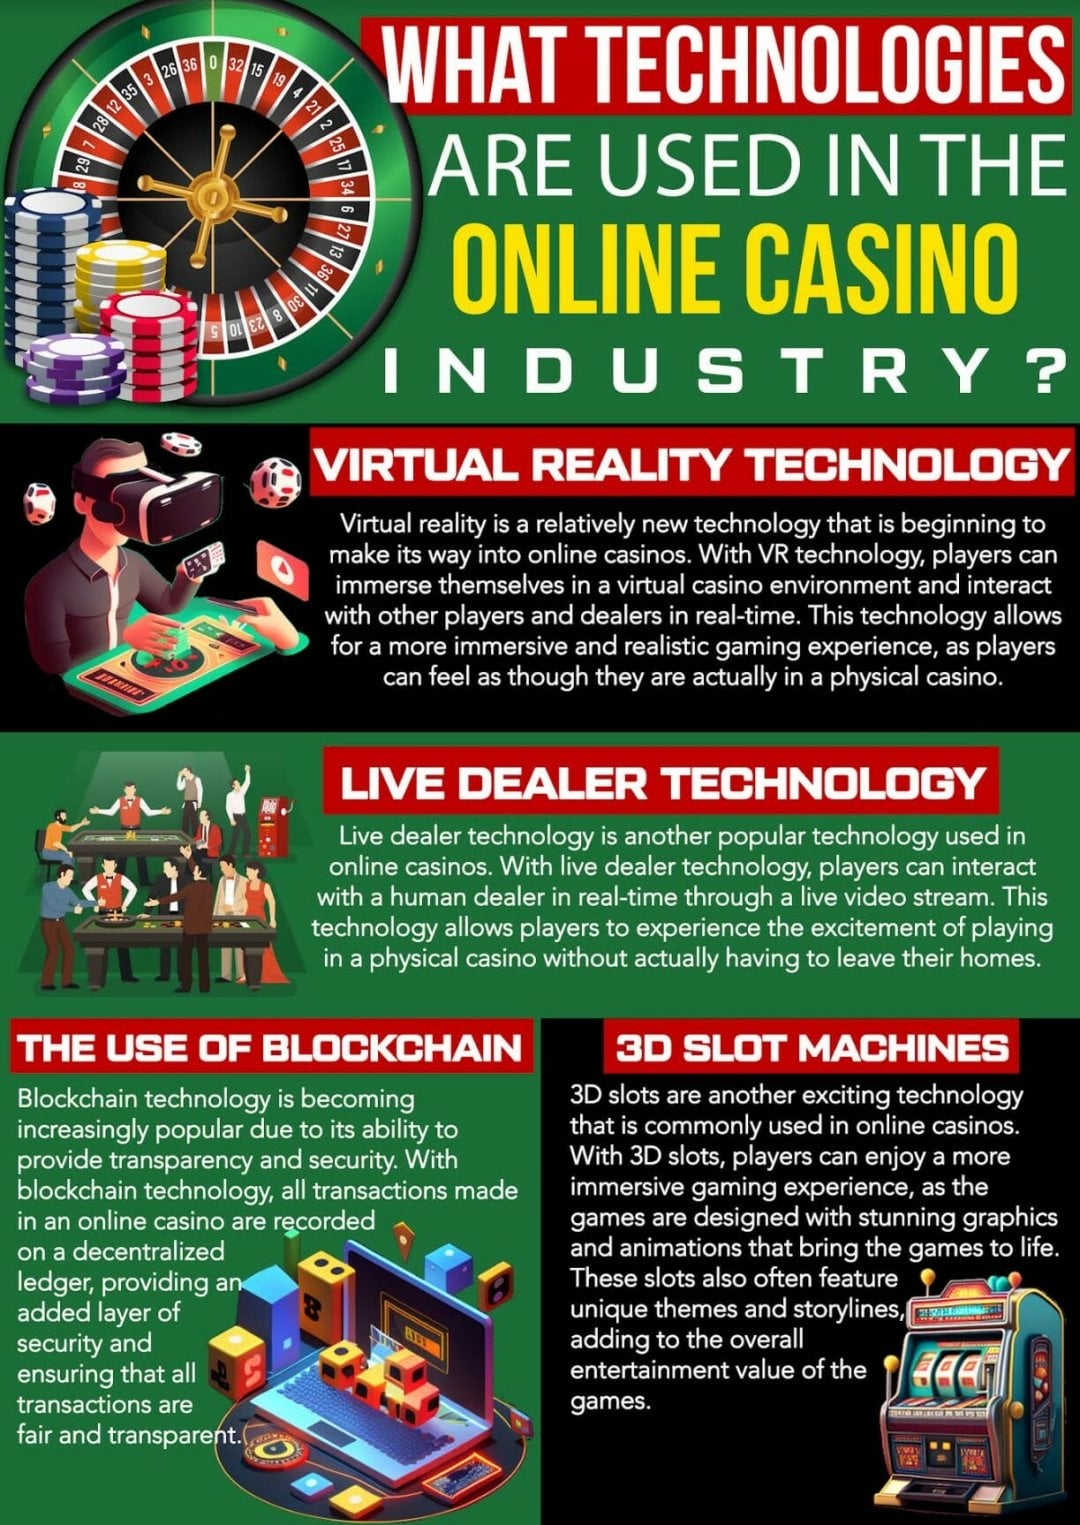 The Importance of Technology in the Online Casino Industry Infographic